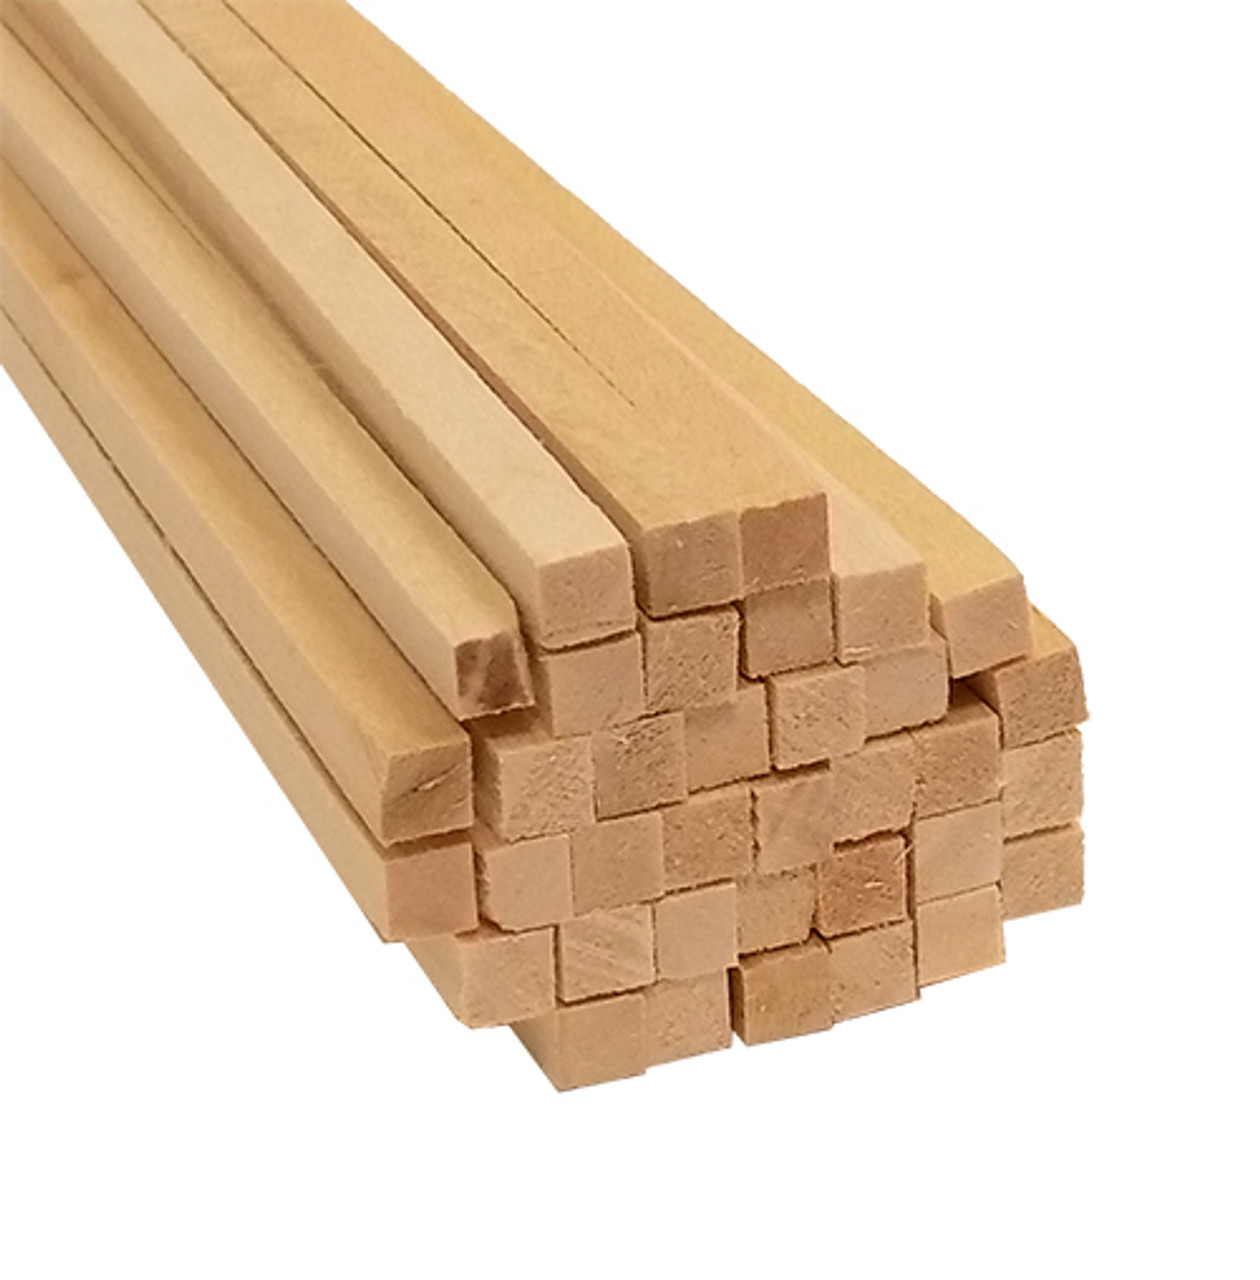 Basswood Sheets - 1/16 x 3 x 24, 15 Pack